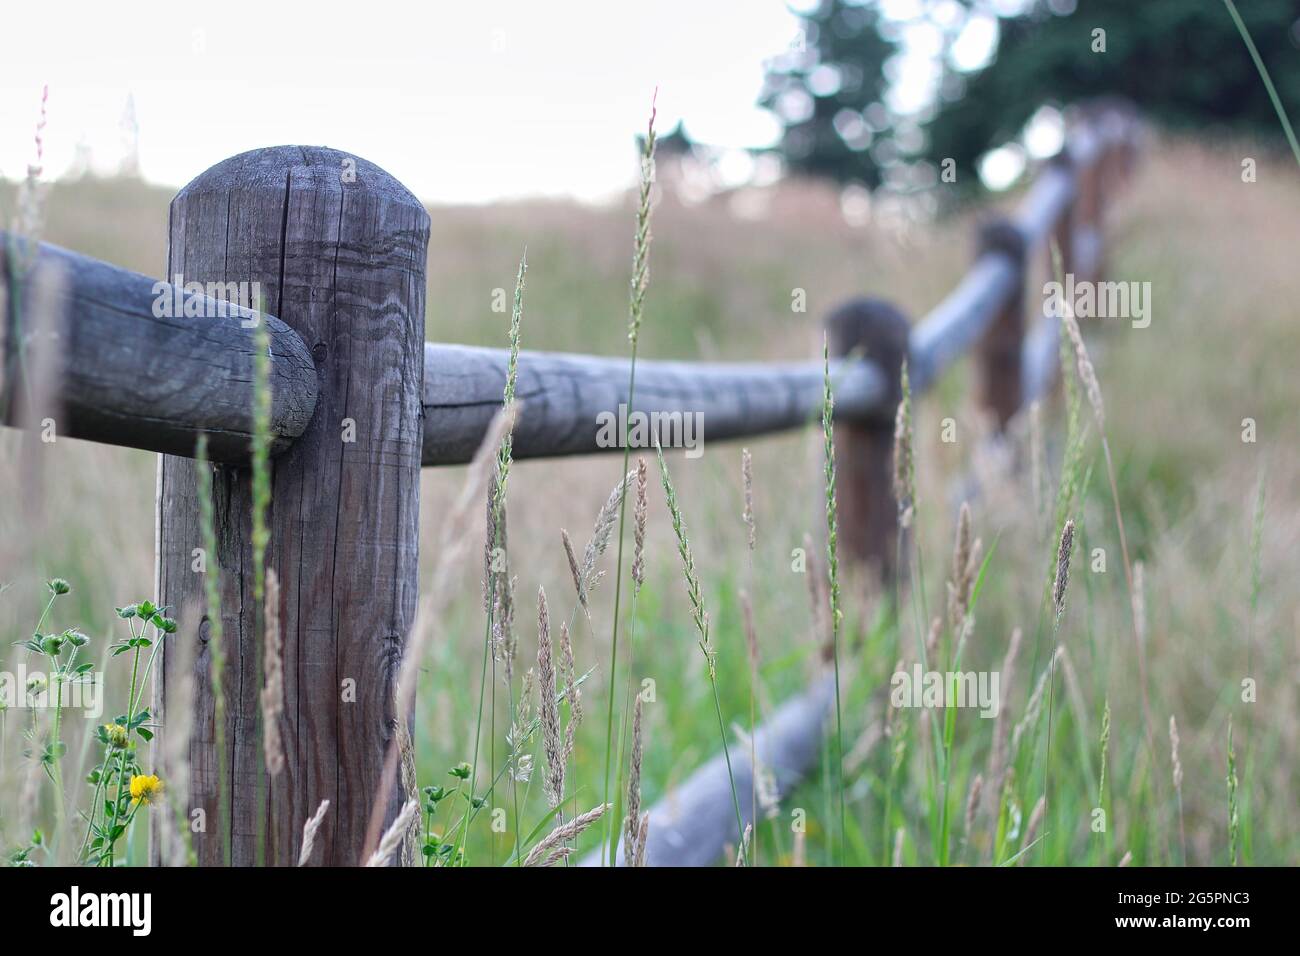 Wood fence line disappearing up the overgrown grassy hillside Stock Photo